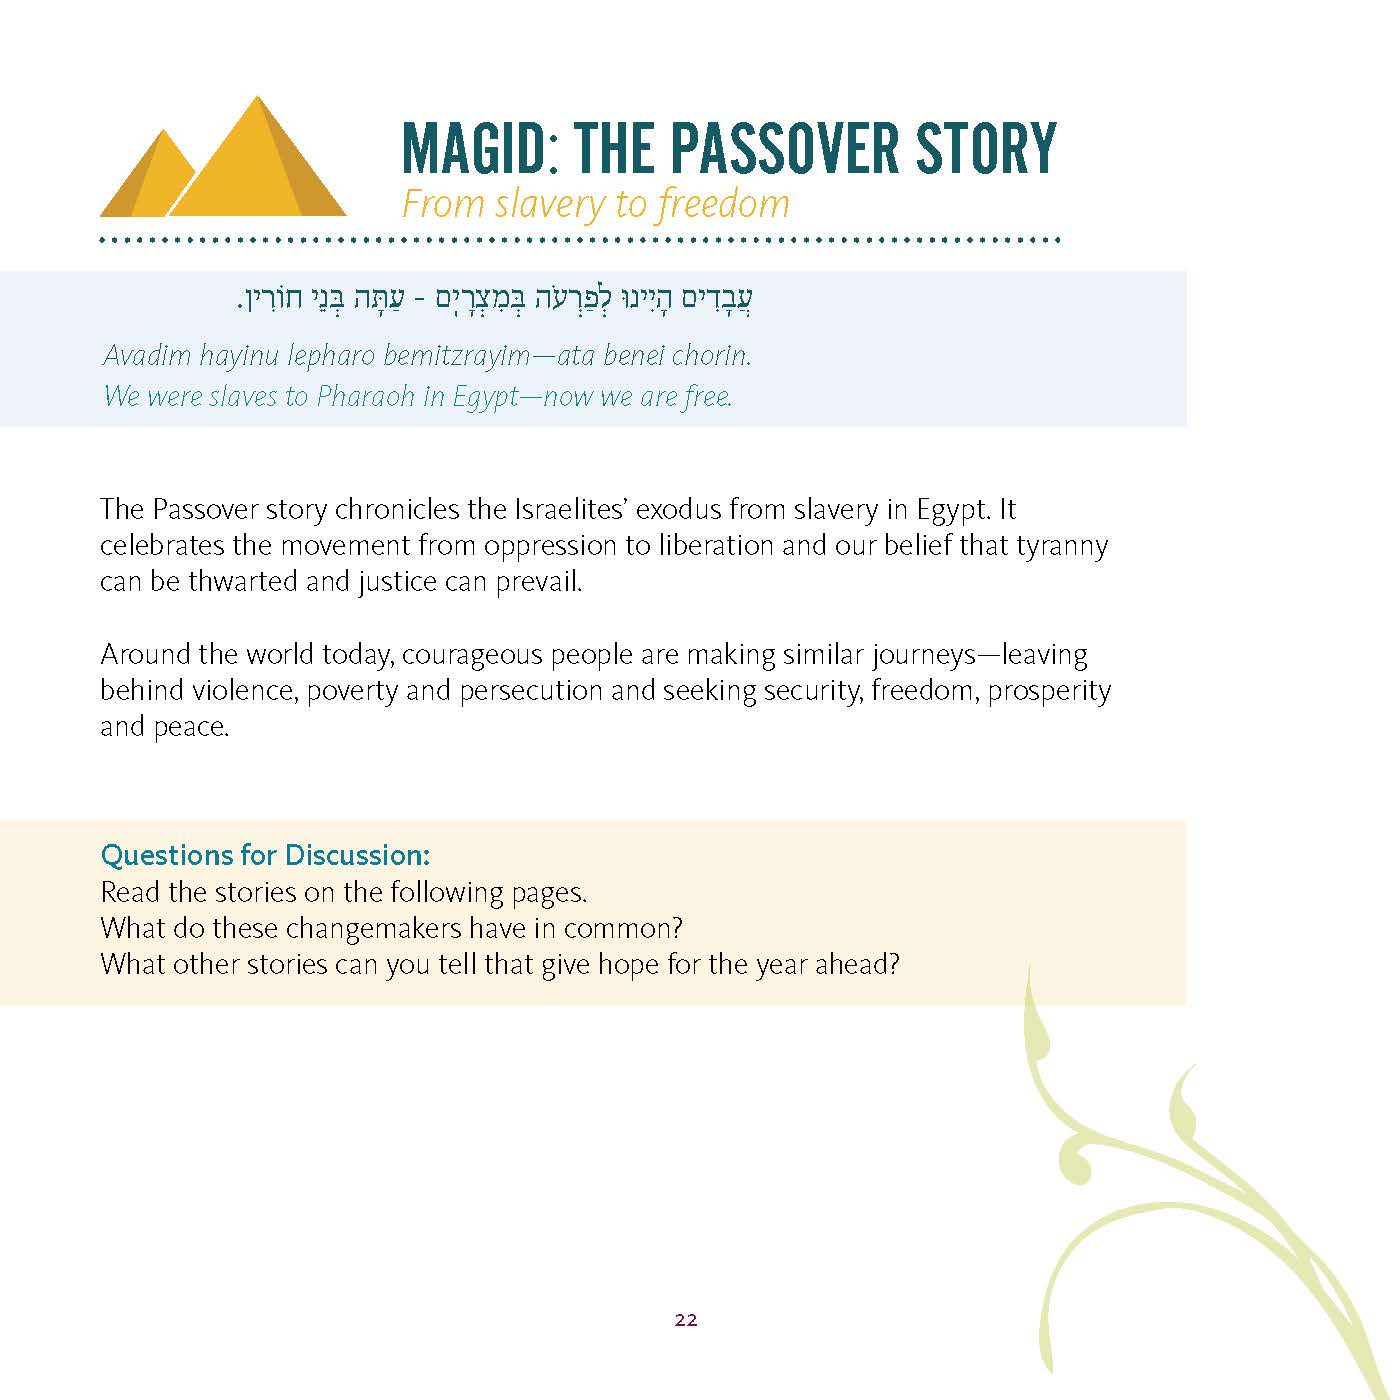 Magid: The Passover Story